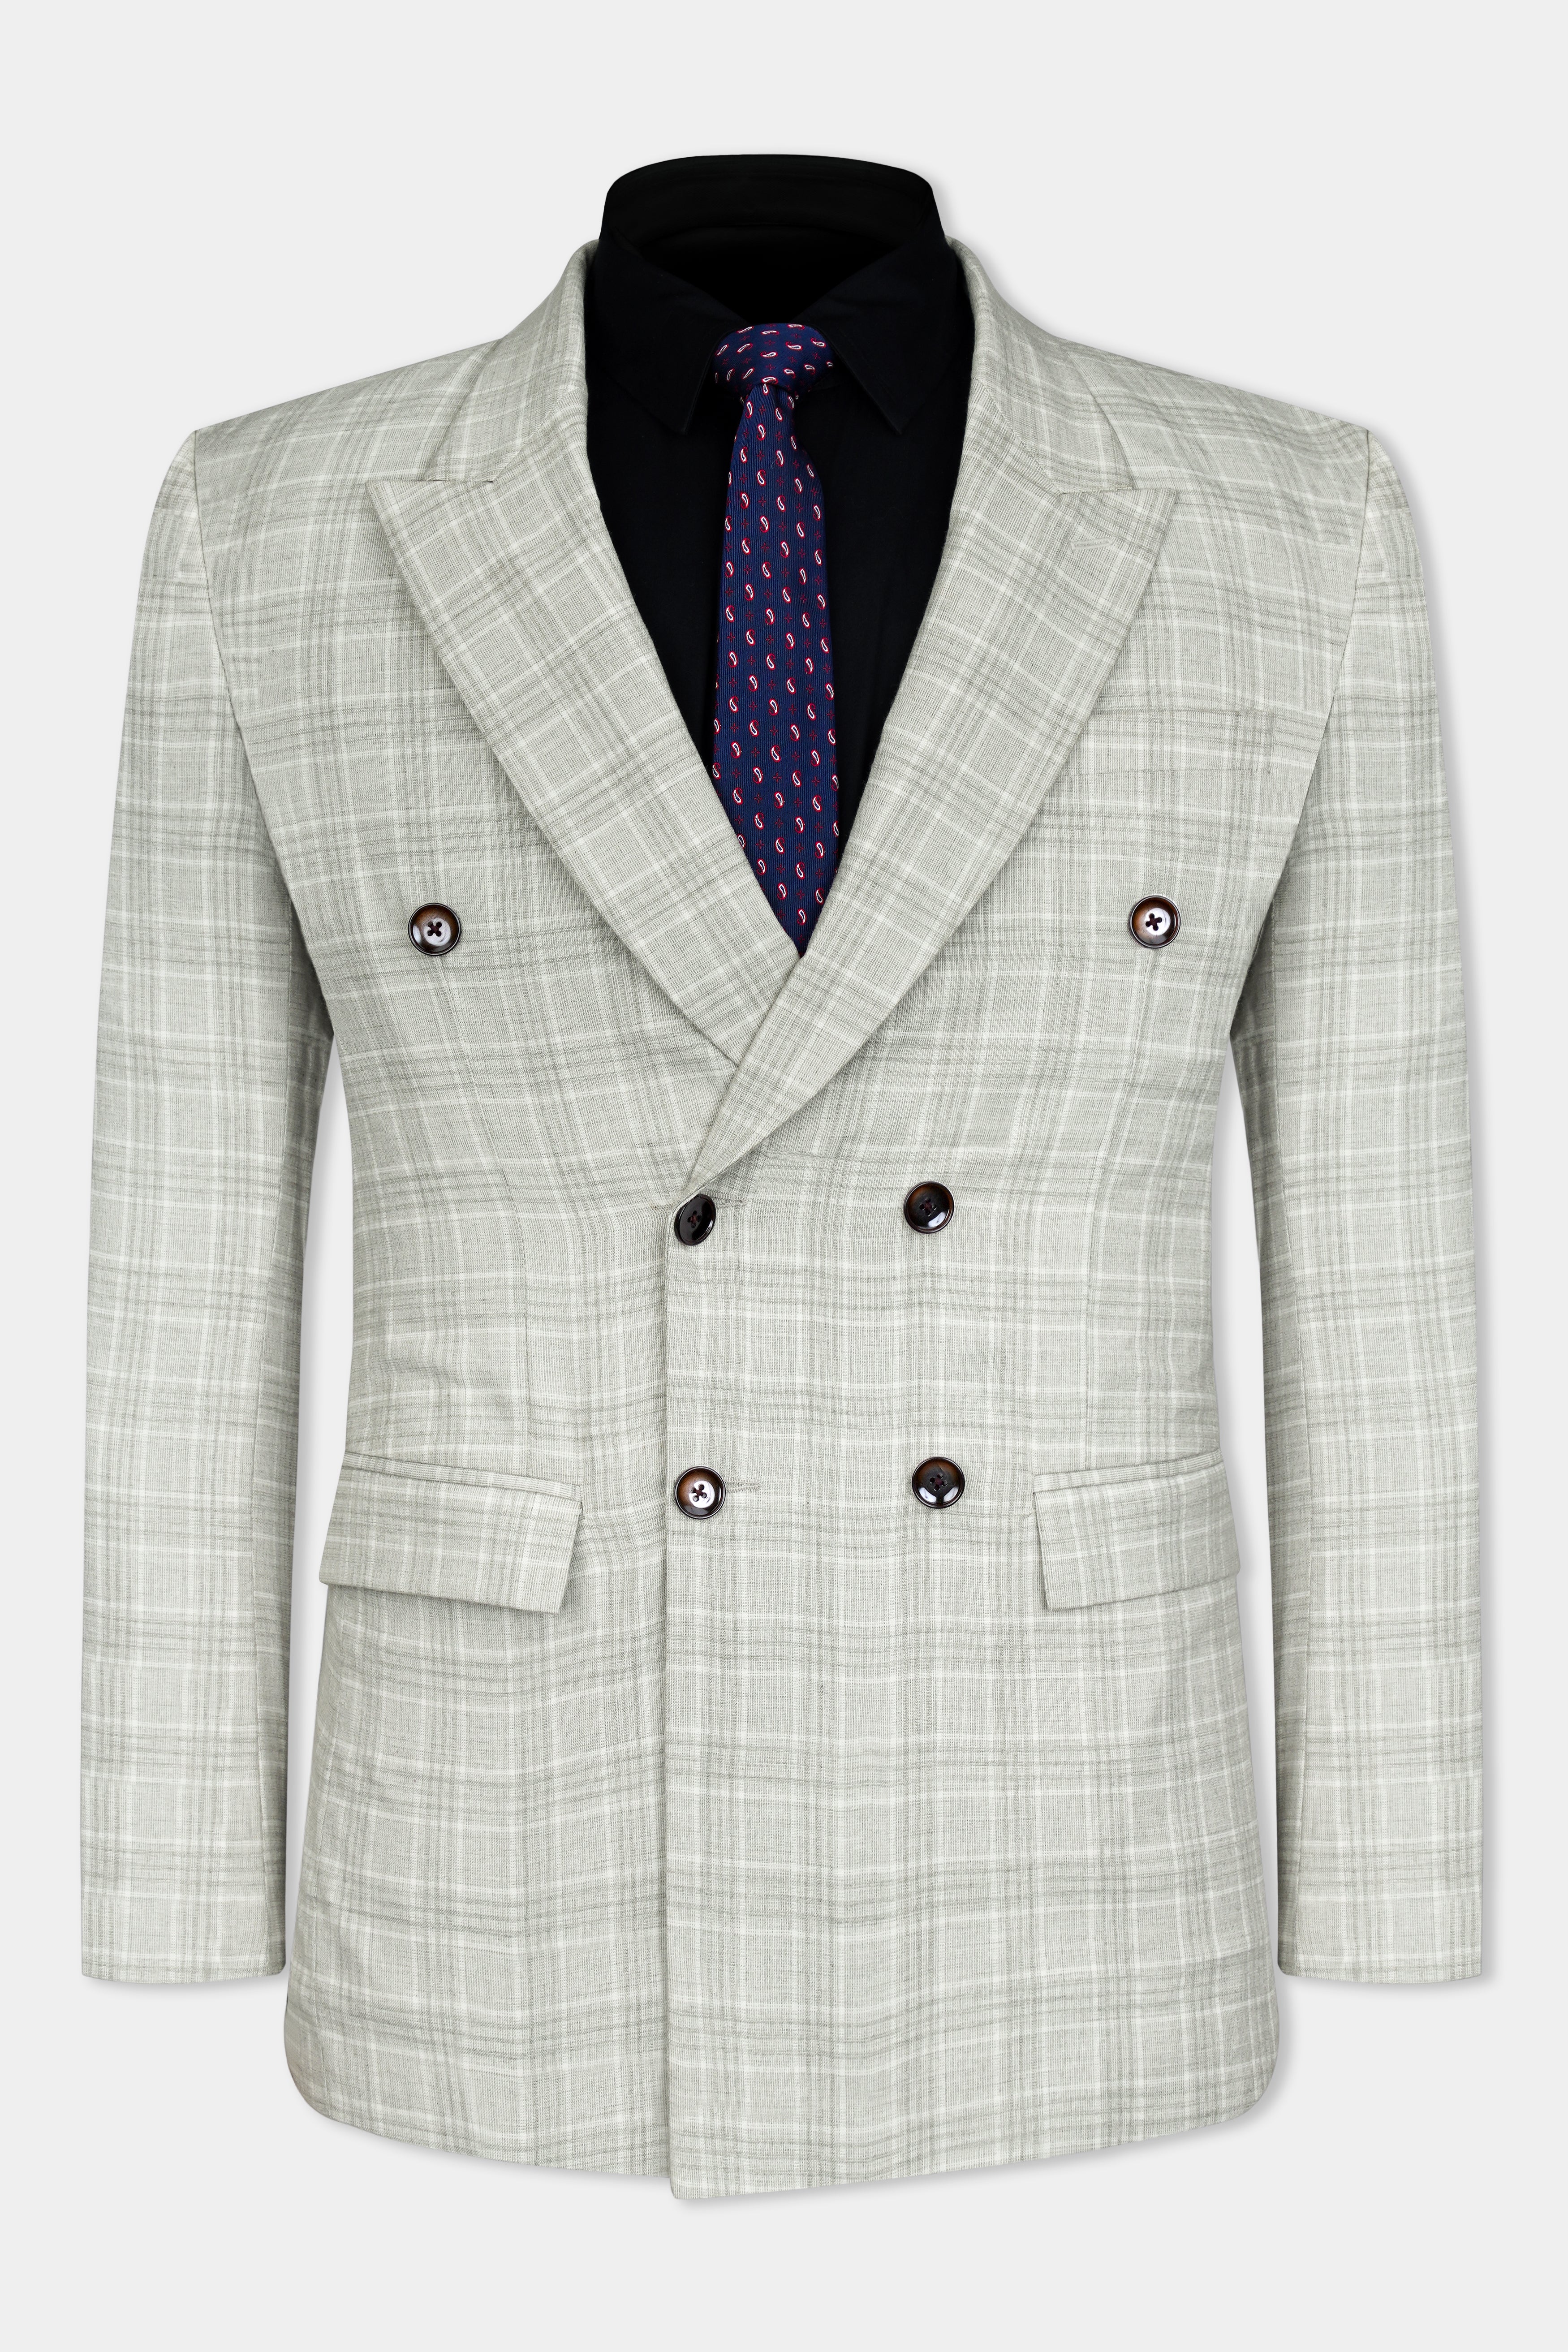 Cloud Gray Plaid Wool Rich Double Breasted Blazer